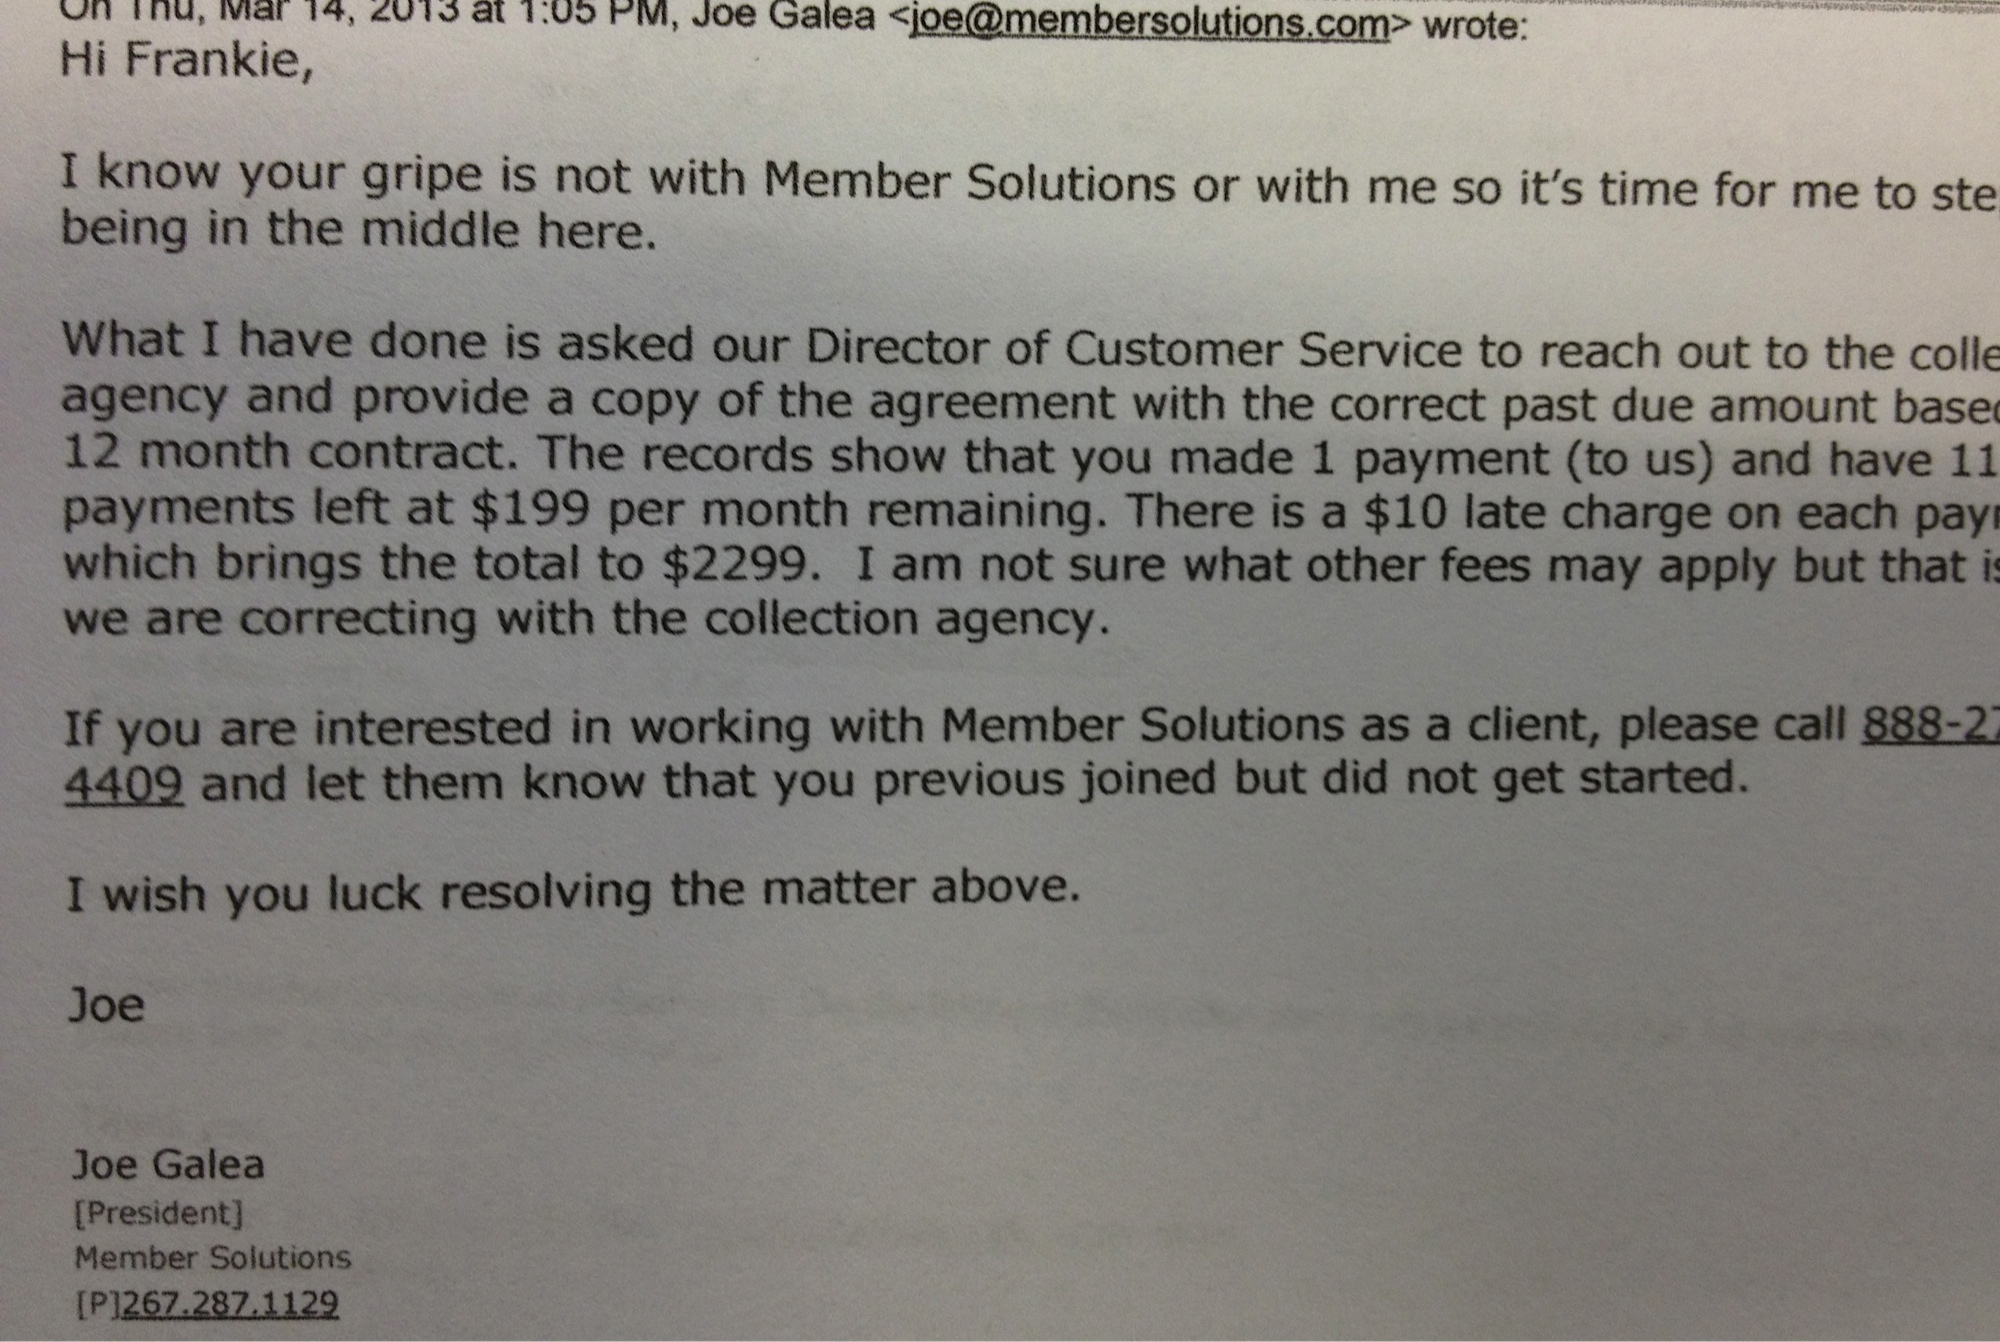 #7 Joe Galea's email stating the amount was 12 months